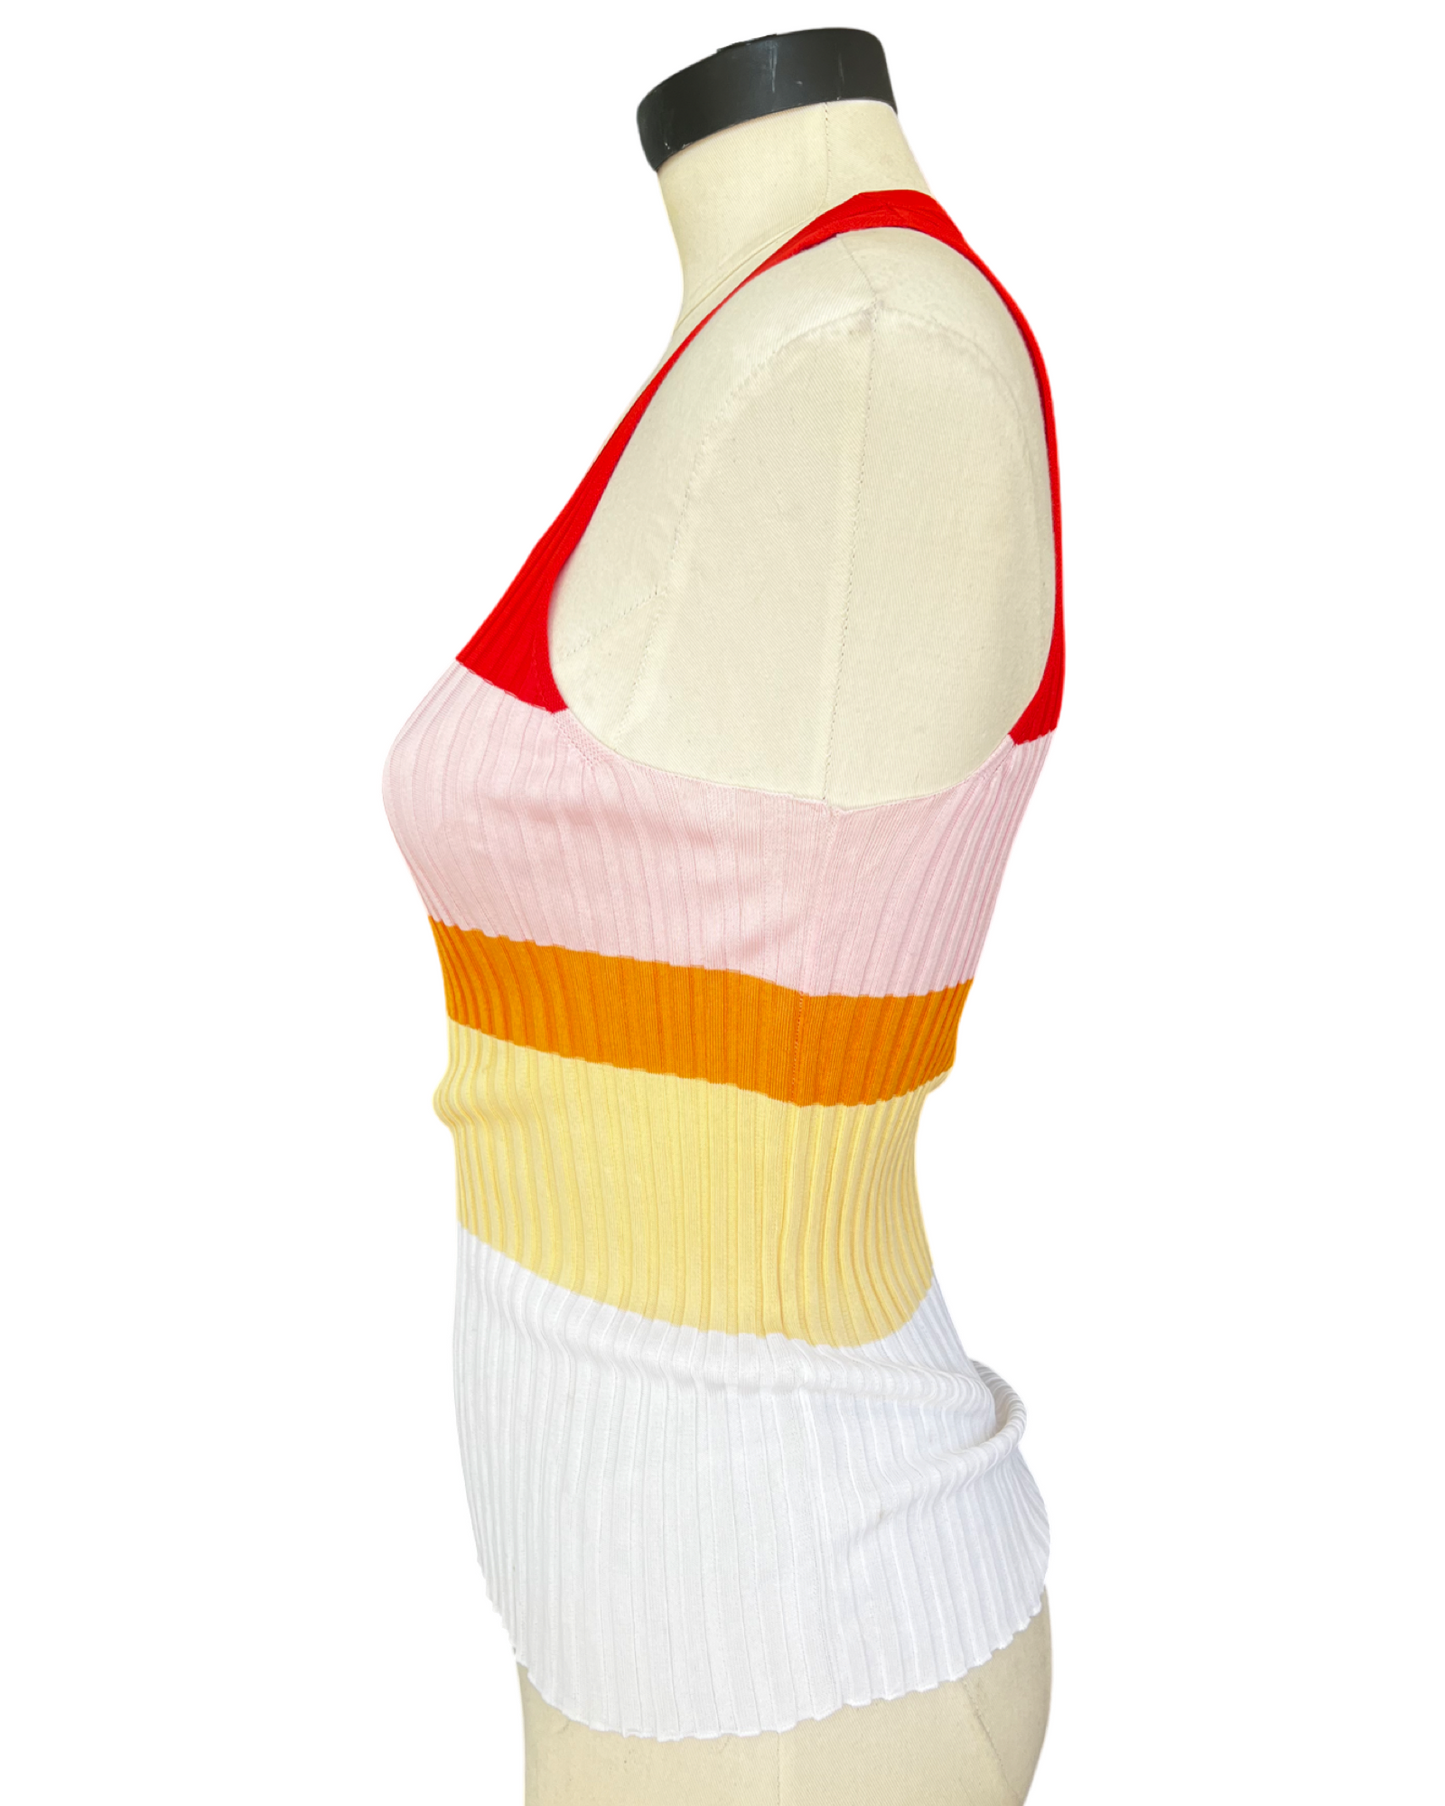 EMILIO PUCCI Striped Ribbed Knit in Red, Pink, Orange, and Yellow, Size Medium